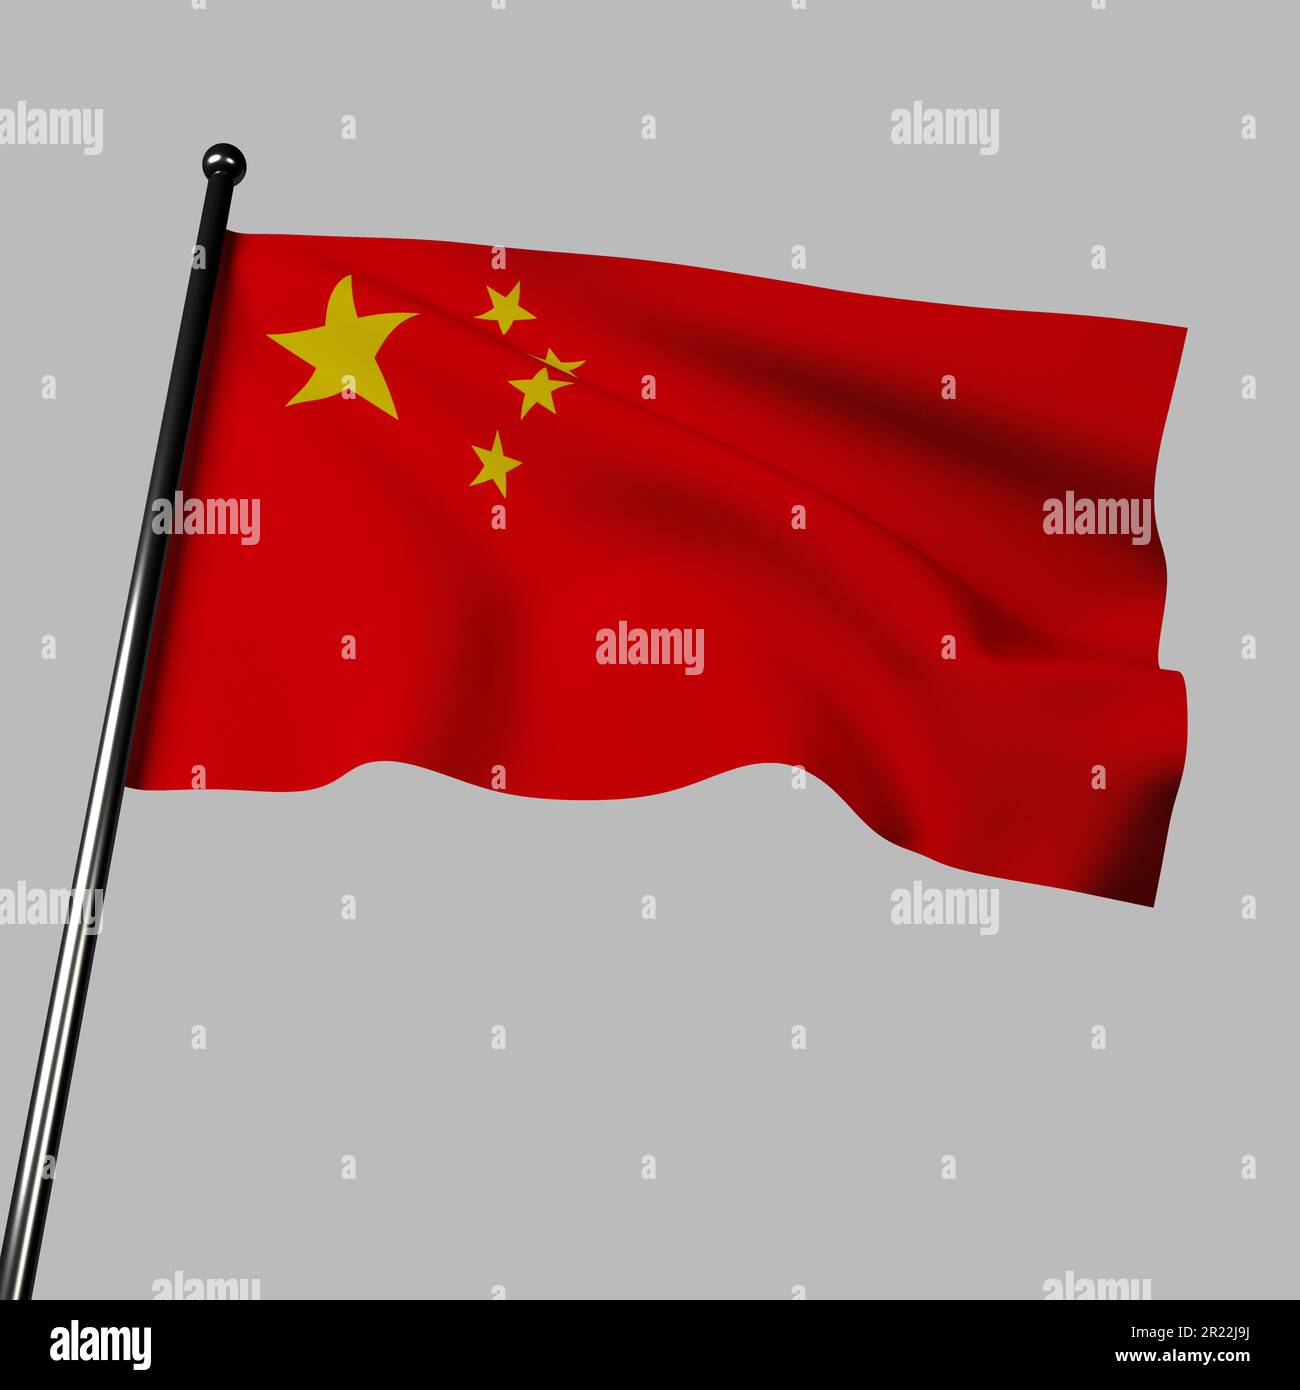 Source text China flag waving on gray background. Red with five golden stars in top left corner, arranged in five-pointed pattern. Symbolizes revoluti Stock Photo